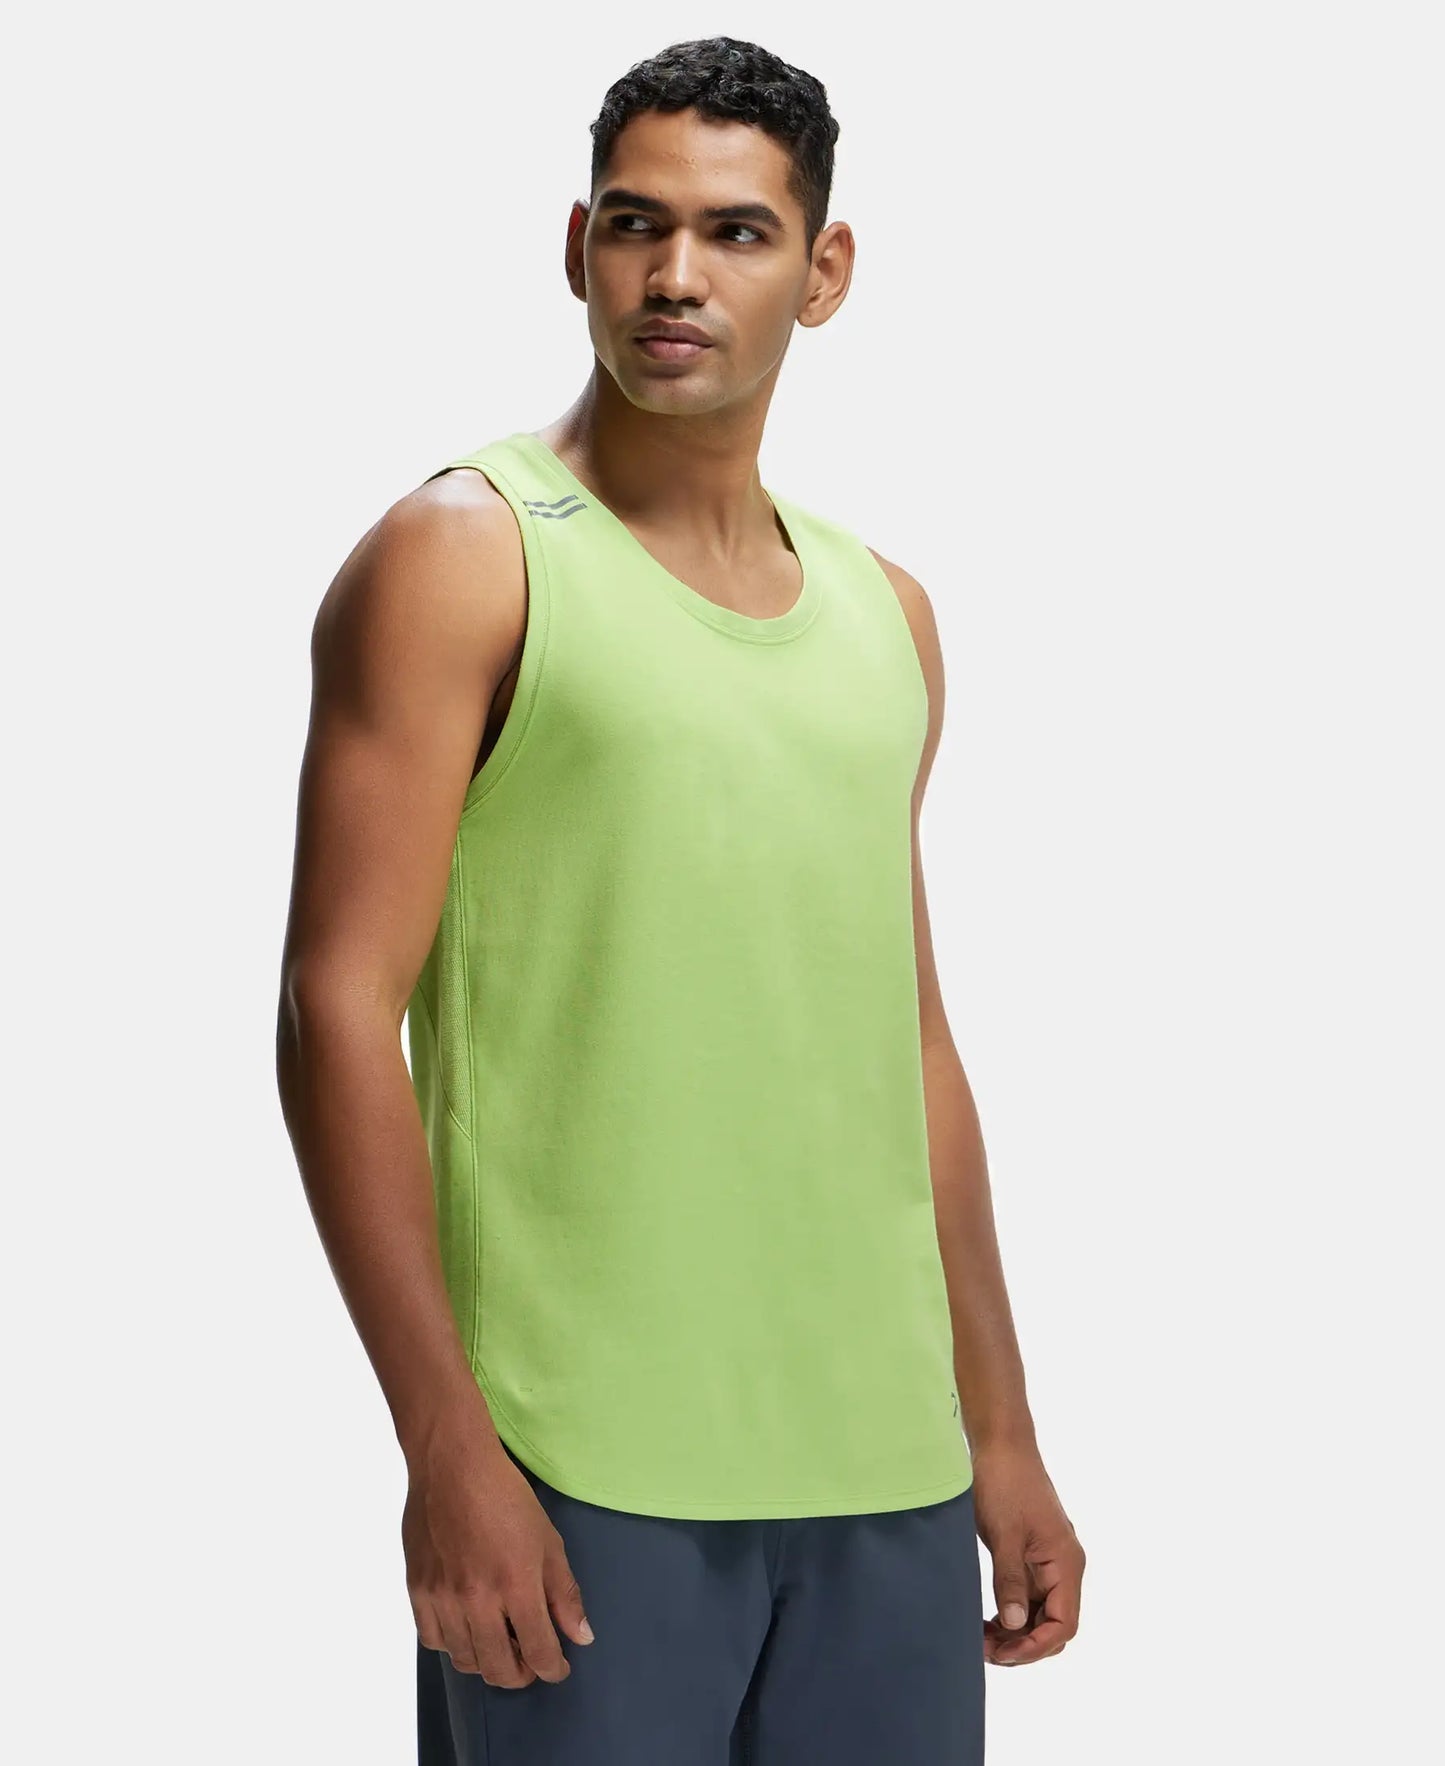 Super Combed Cotton Blend Solid Performance Tank Top with Breathable Mesh - Green Glow-2